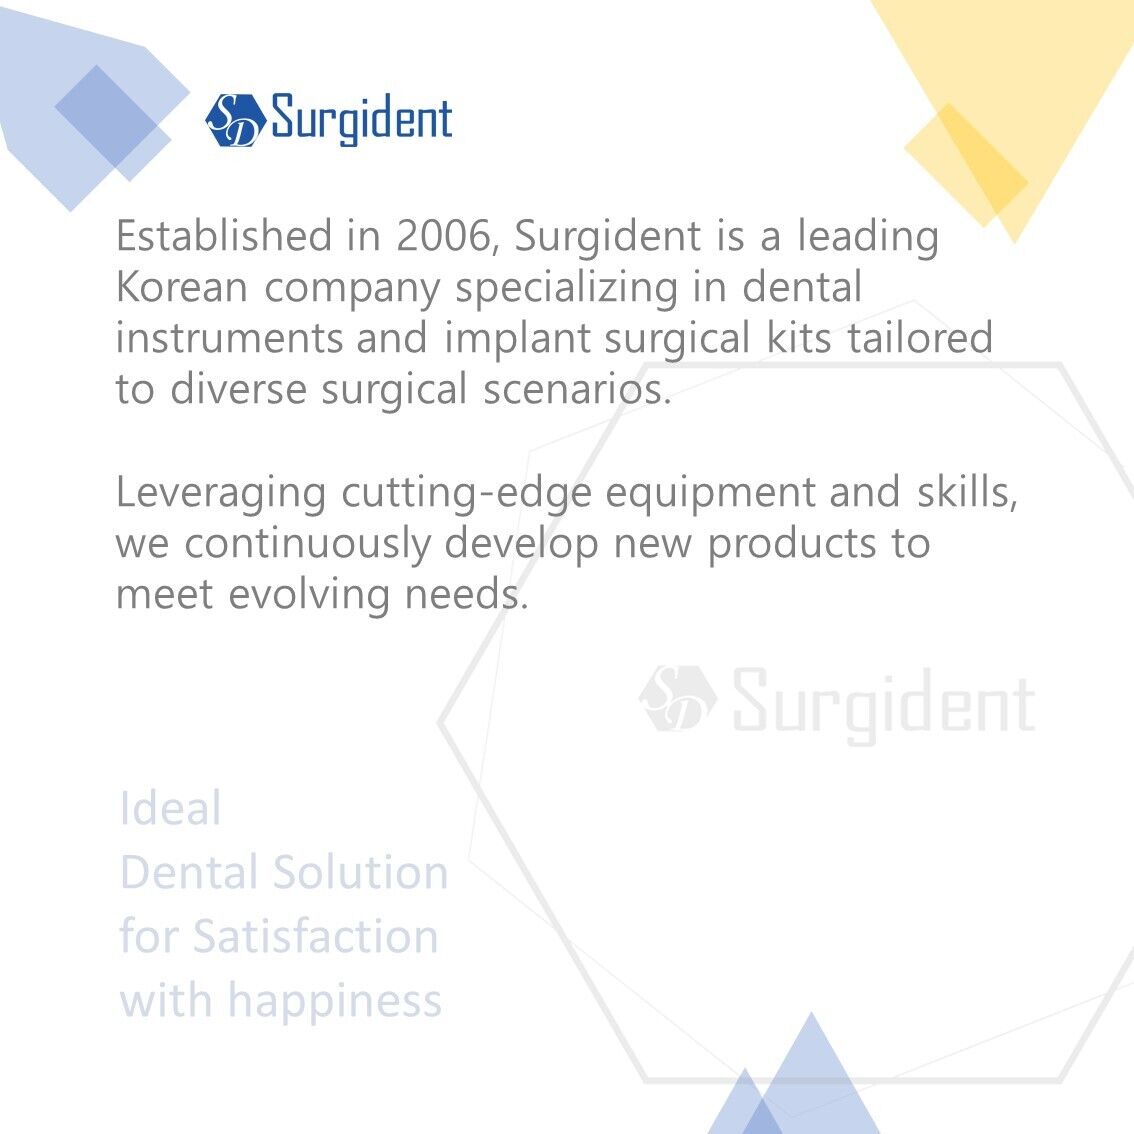 Surgident Periosteal Elevator Dental Surgical Instrument 6 types